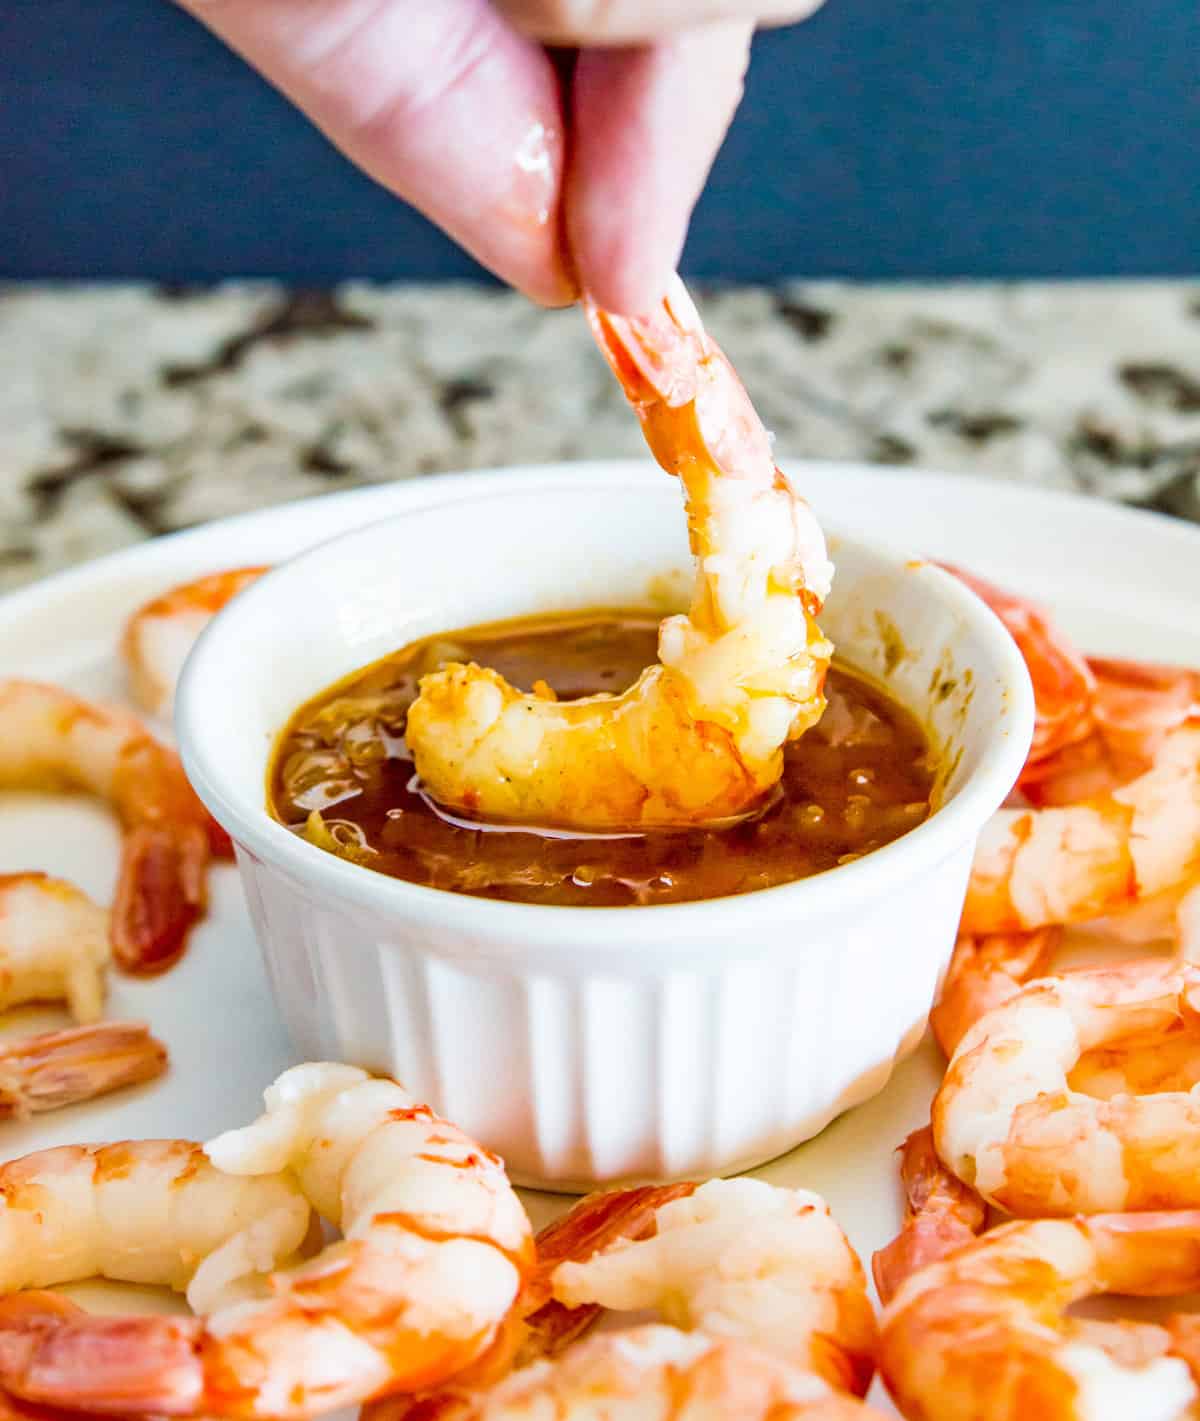 A shrimp being dipped in seafood butter sauce.